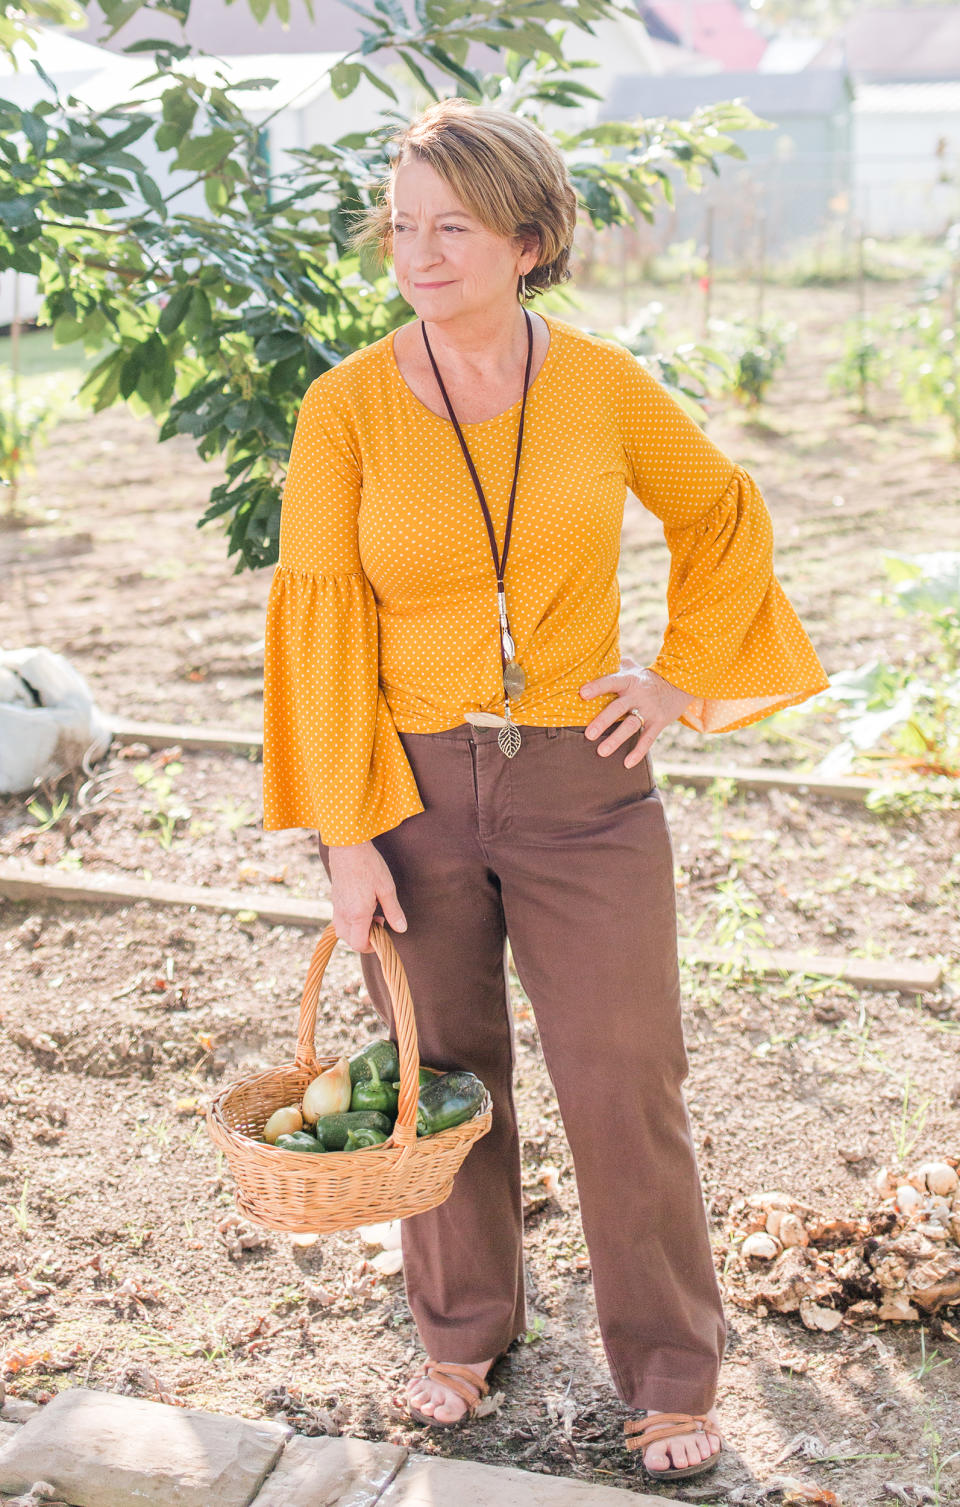 Workman says a plant-based diet transformed her health and life. (Courtesy Katelyn Workman Photography)